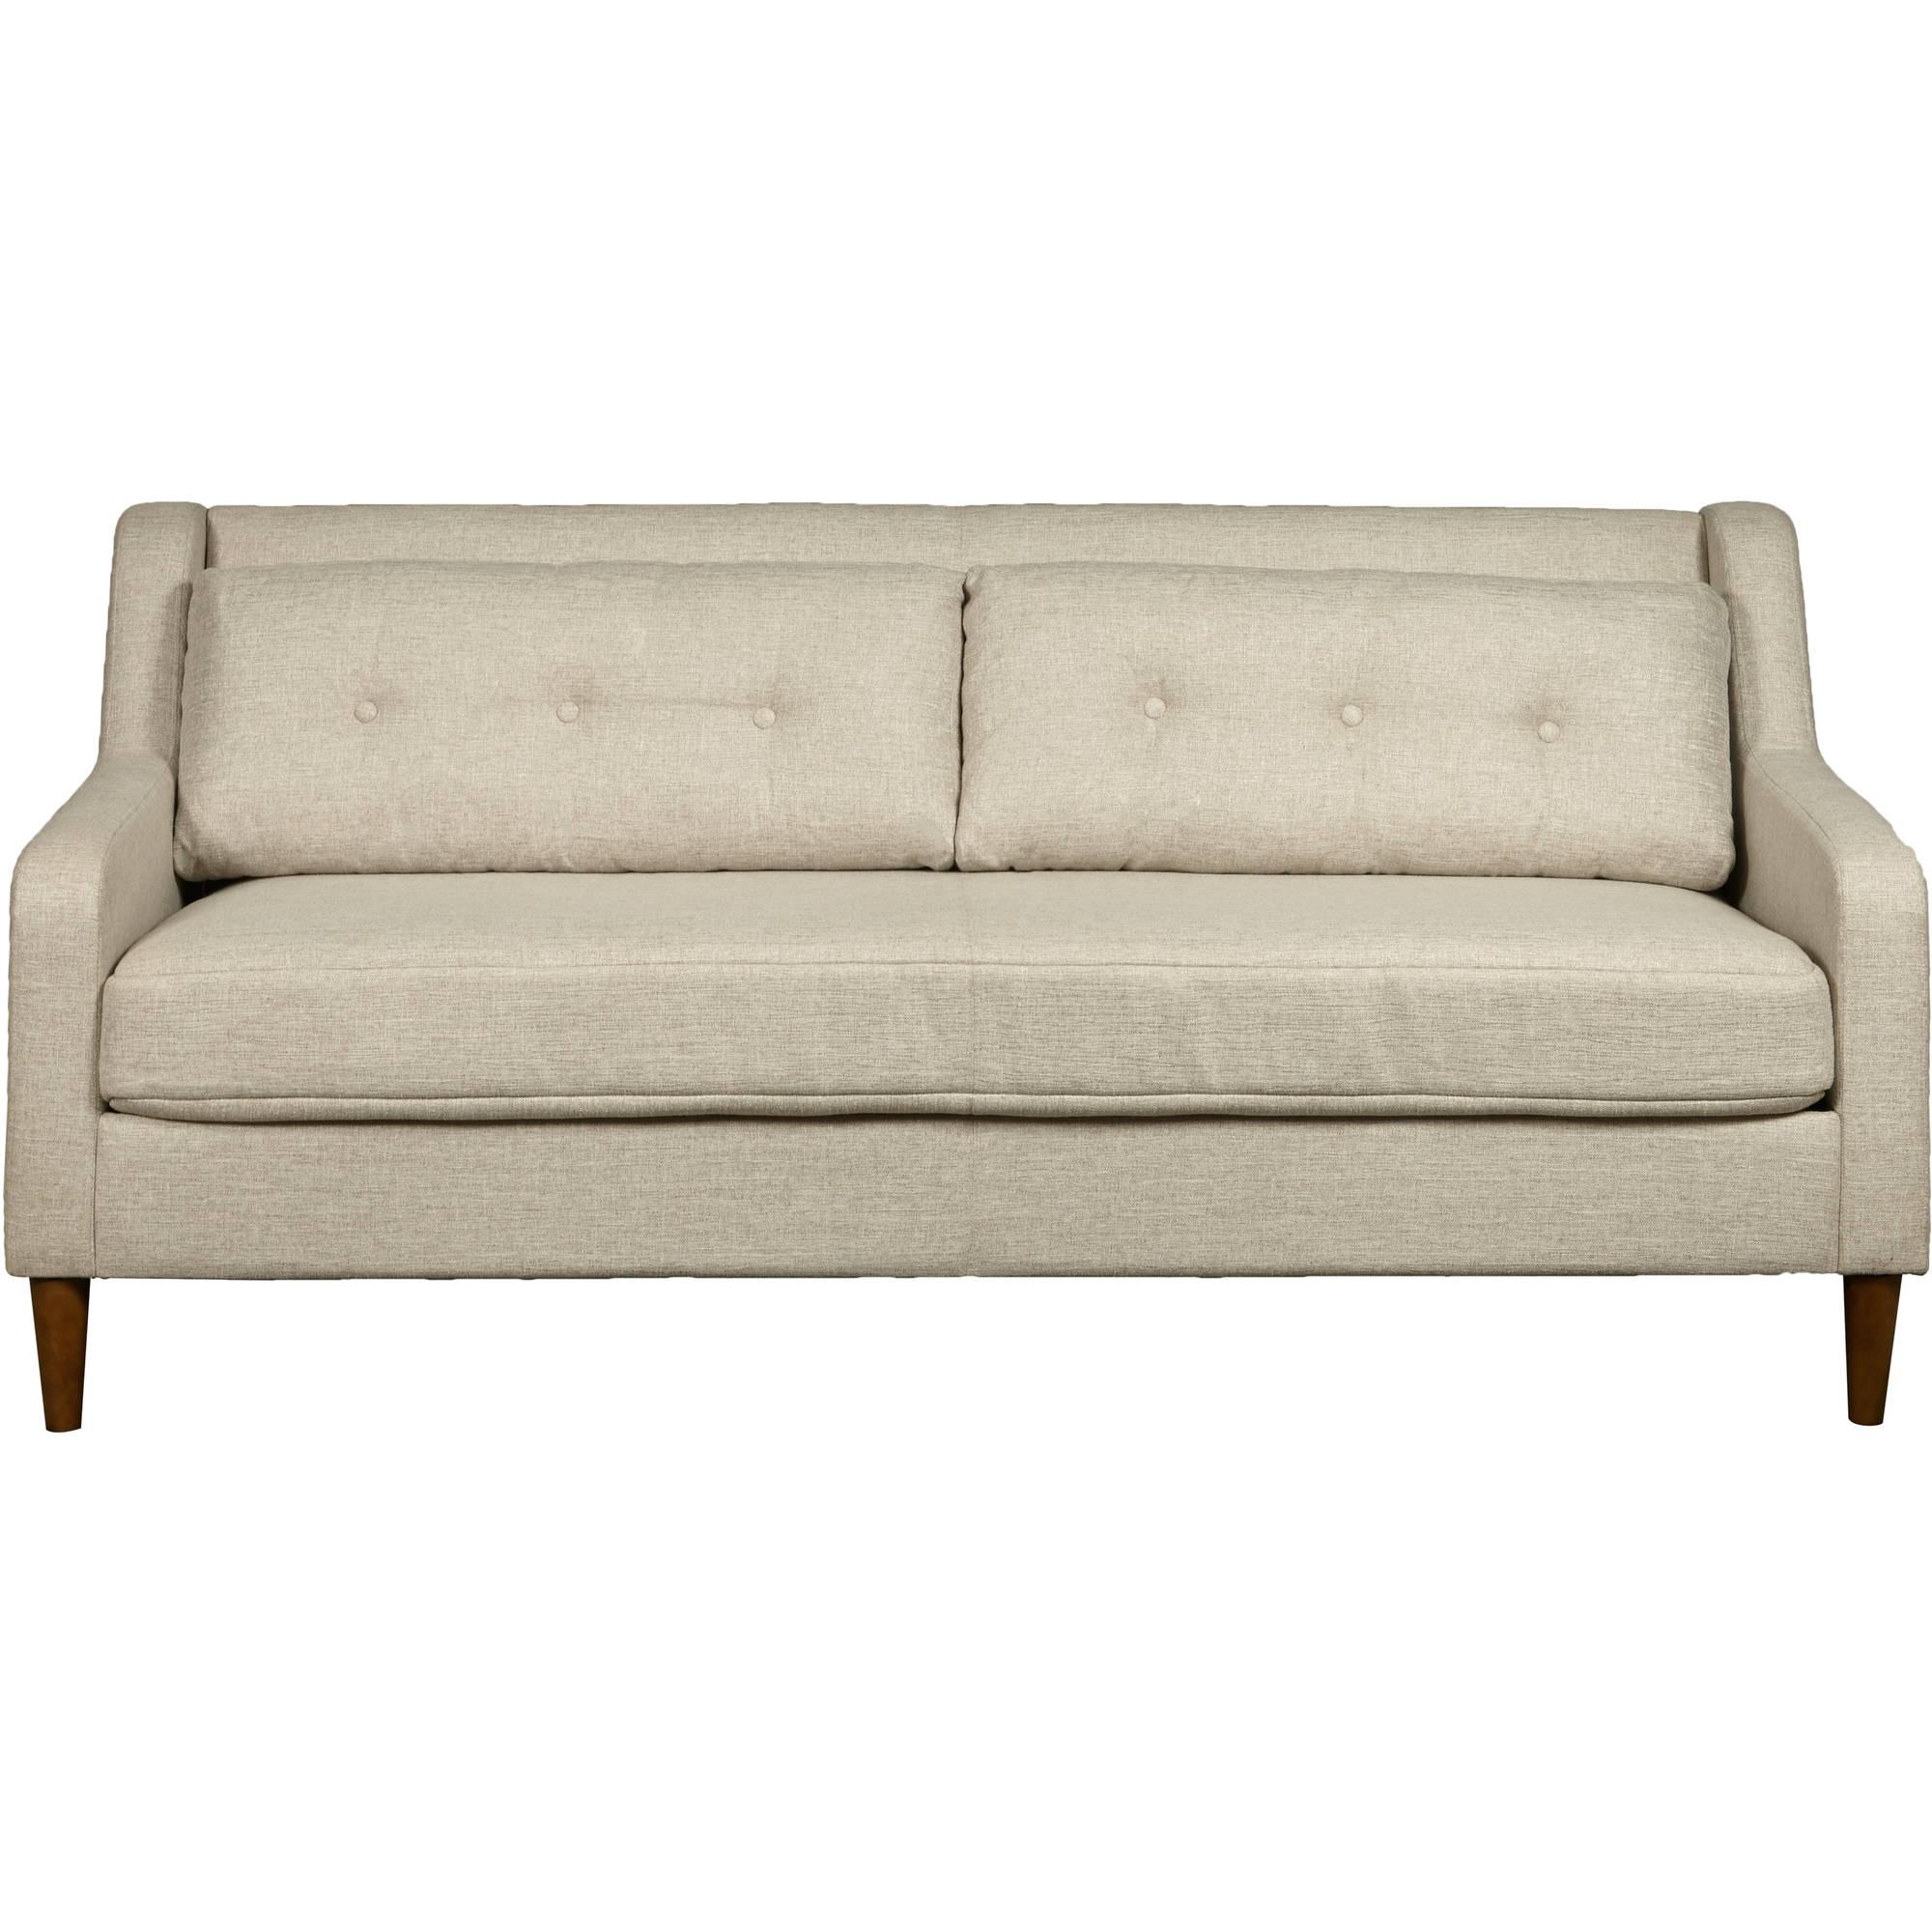 Mid Century Ready to Assemble Sofa in Lunar Linen | Onsales11.com - On Sale